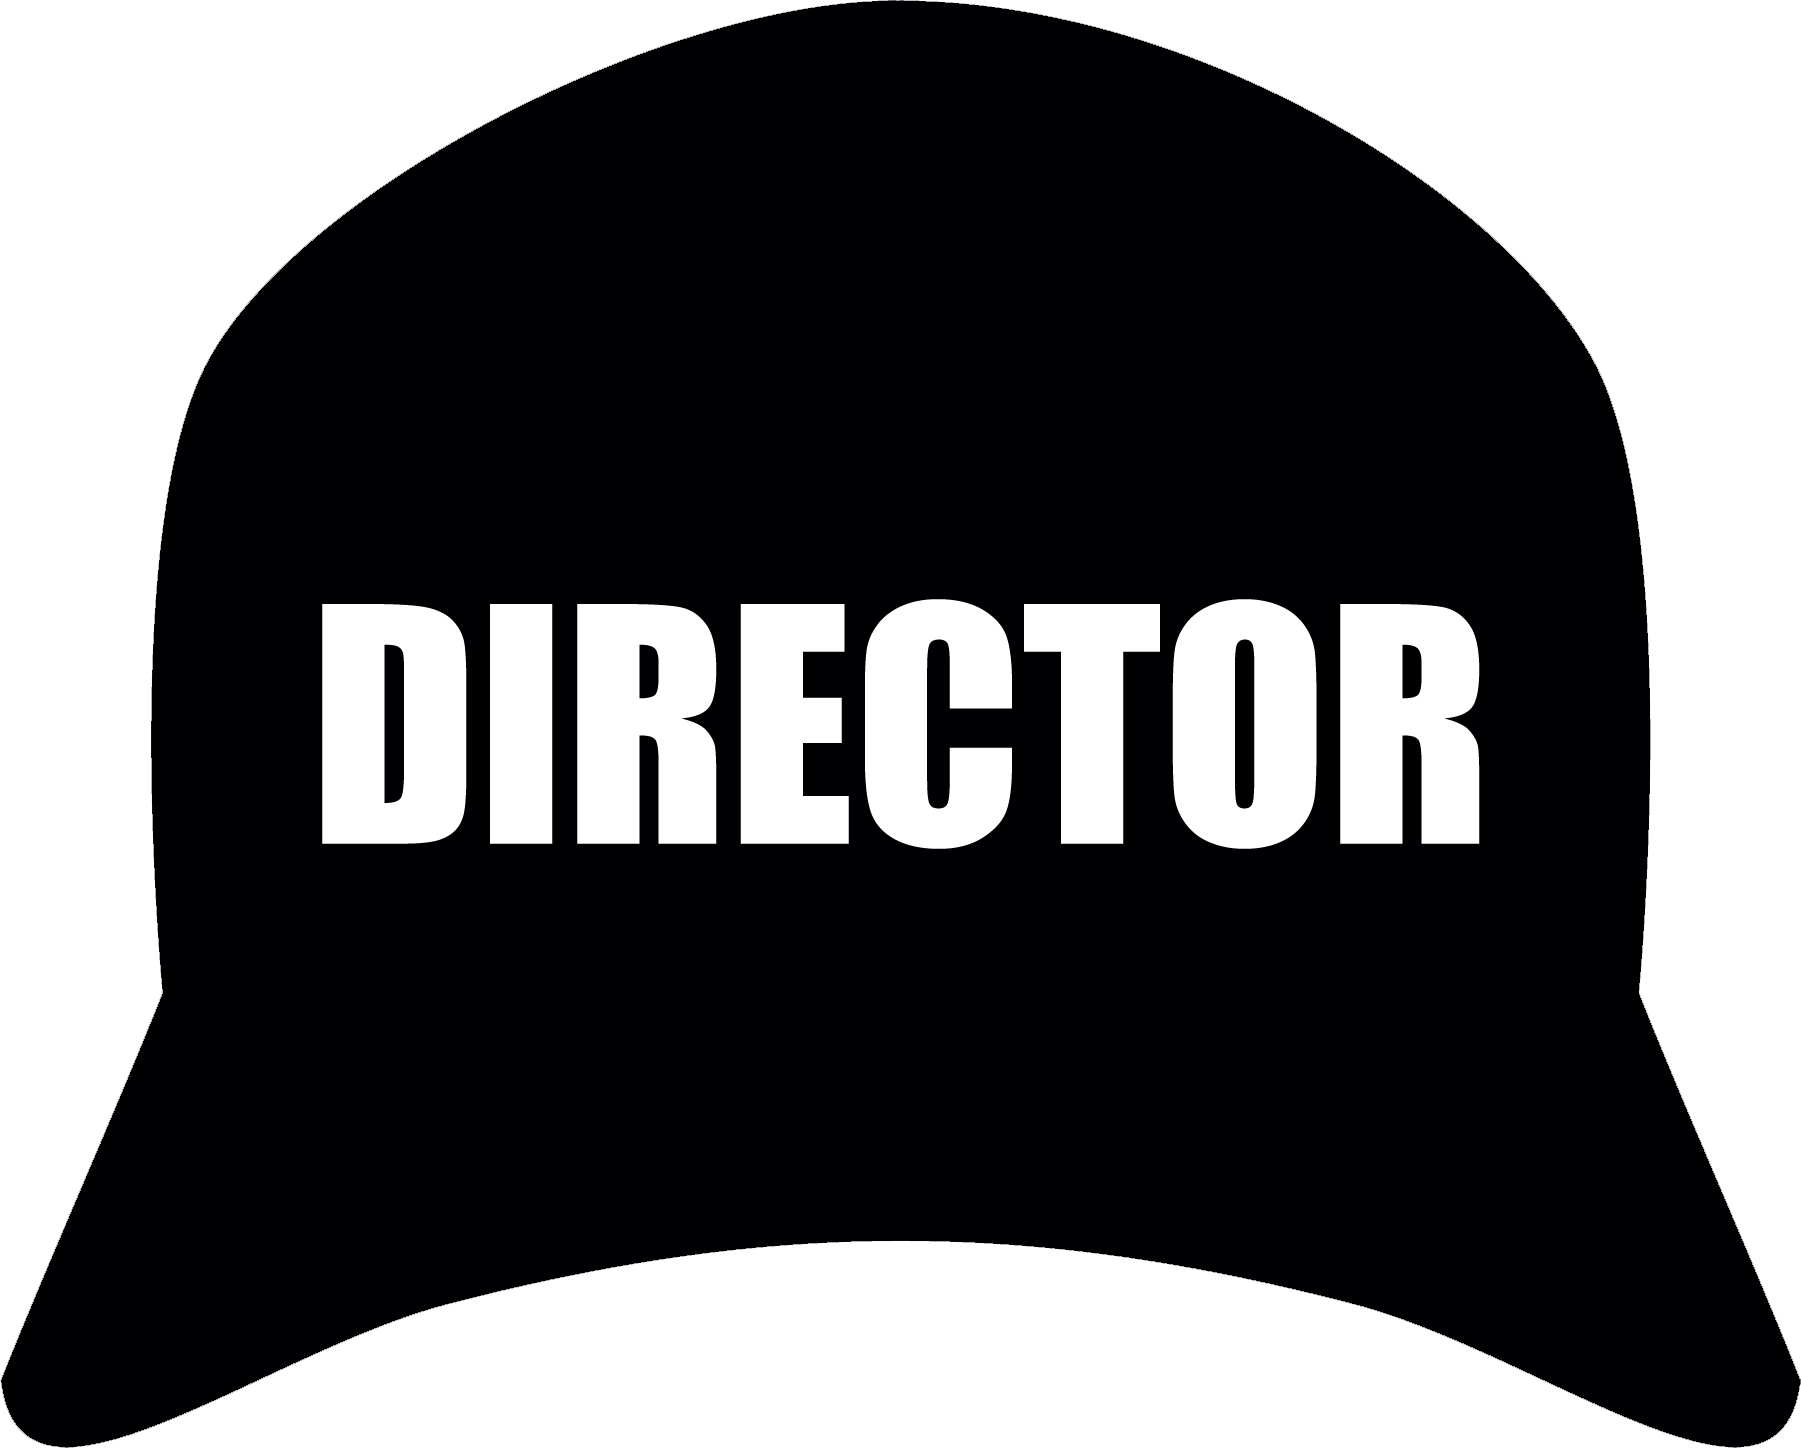 The director